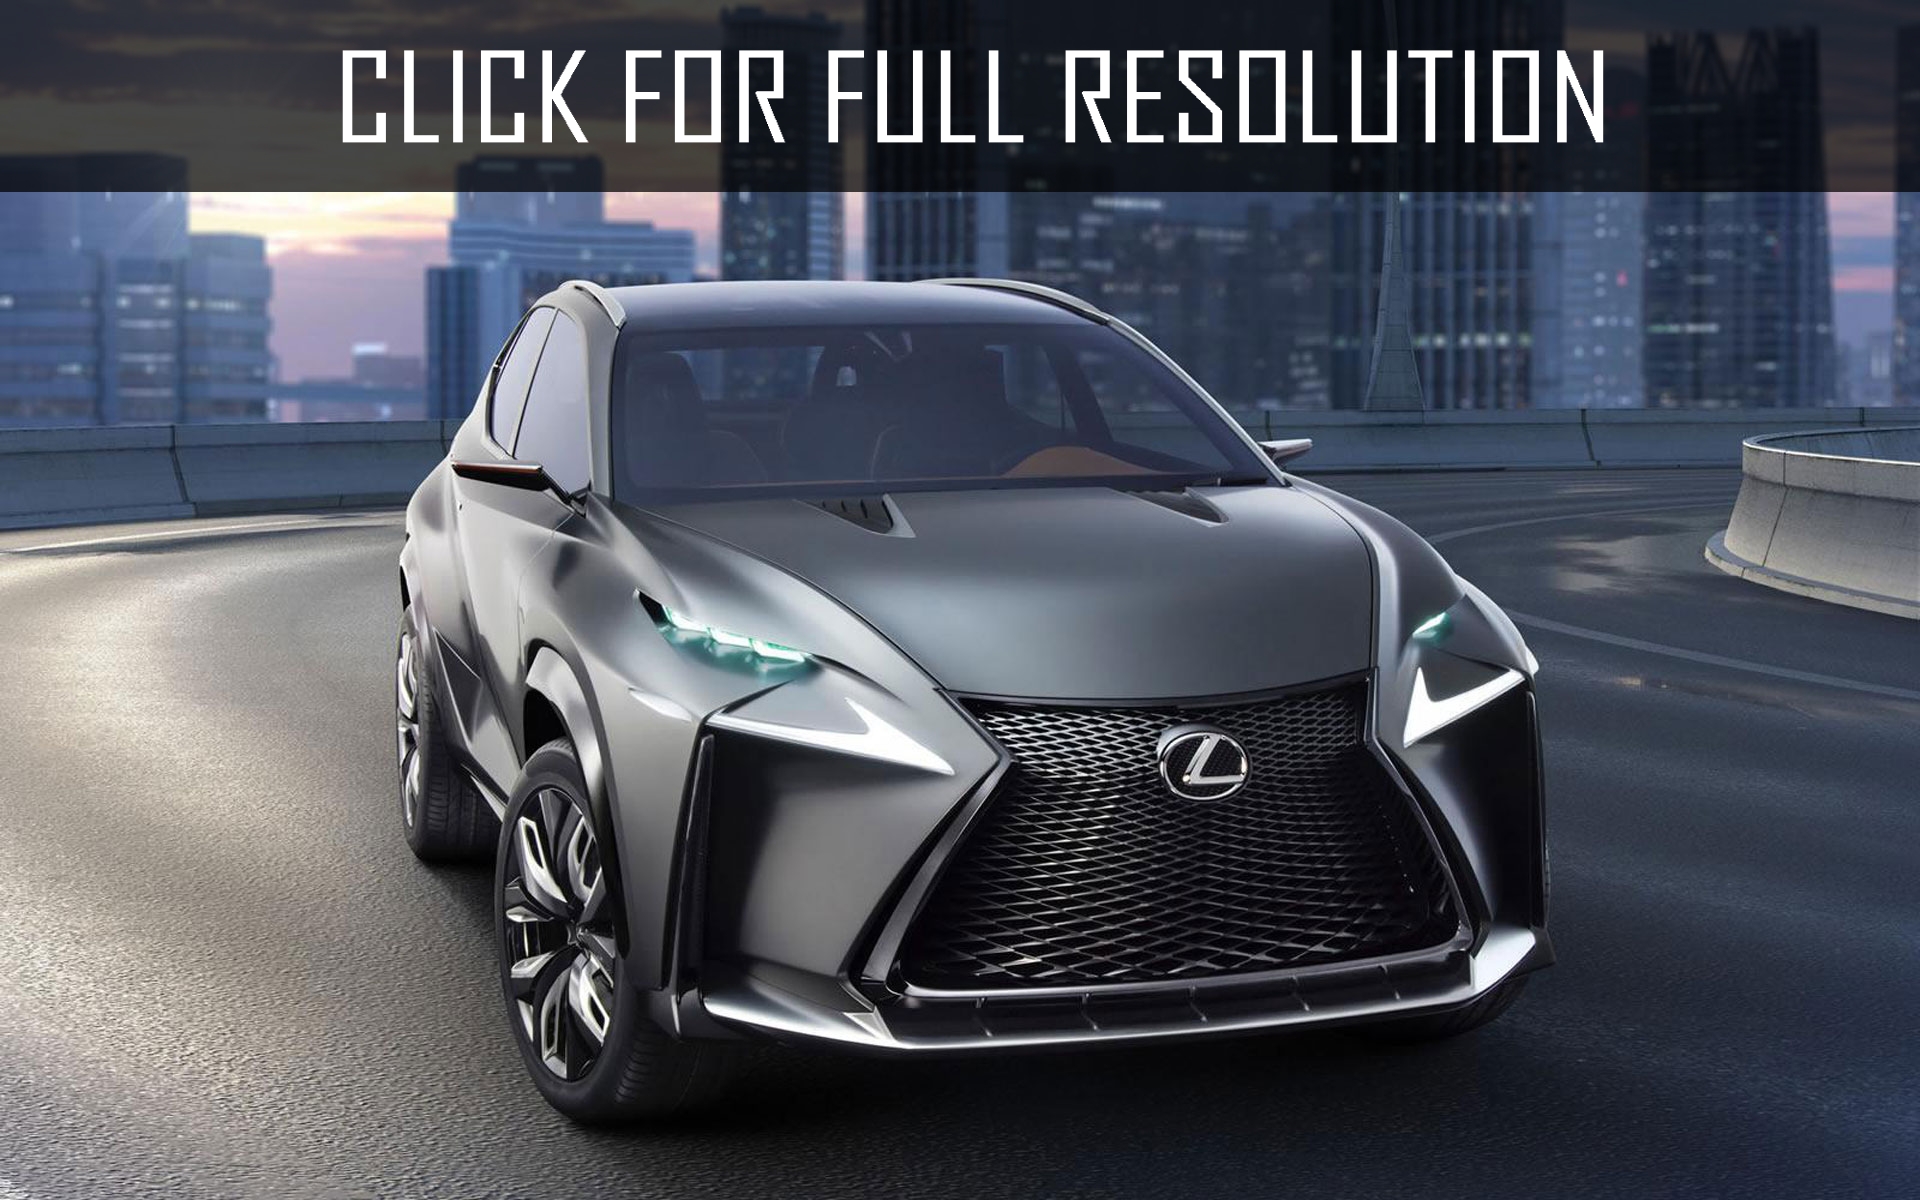 Lexus prepares to release the most affordable crossover